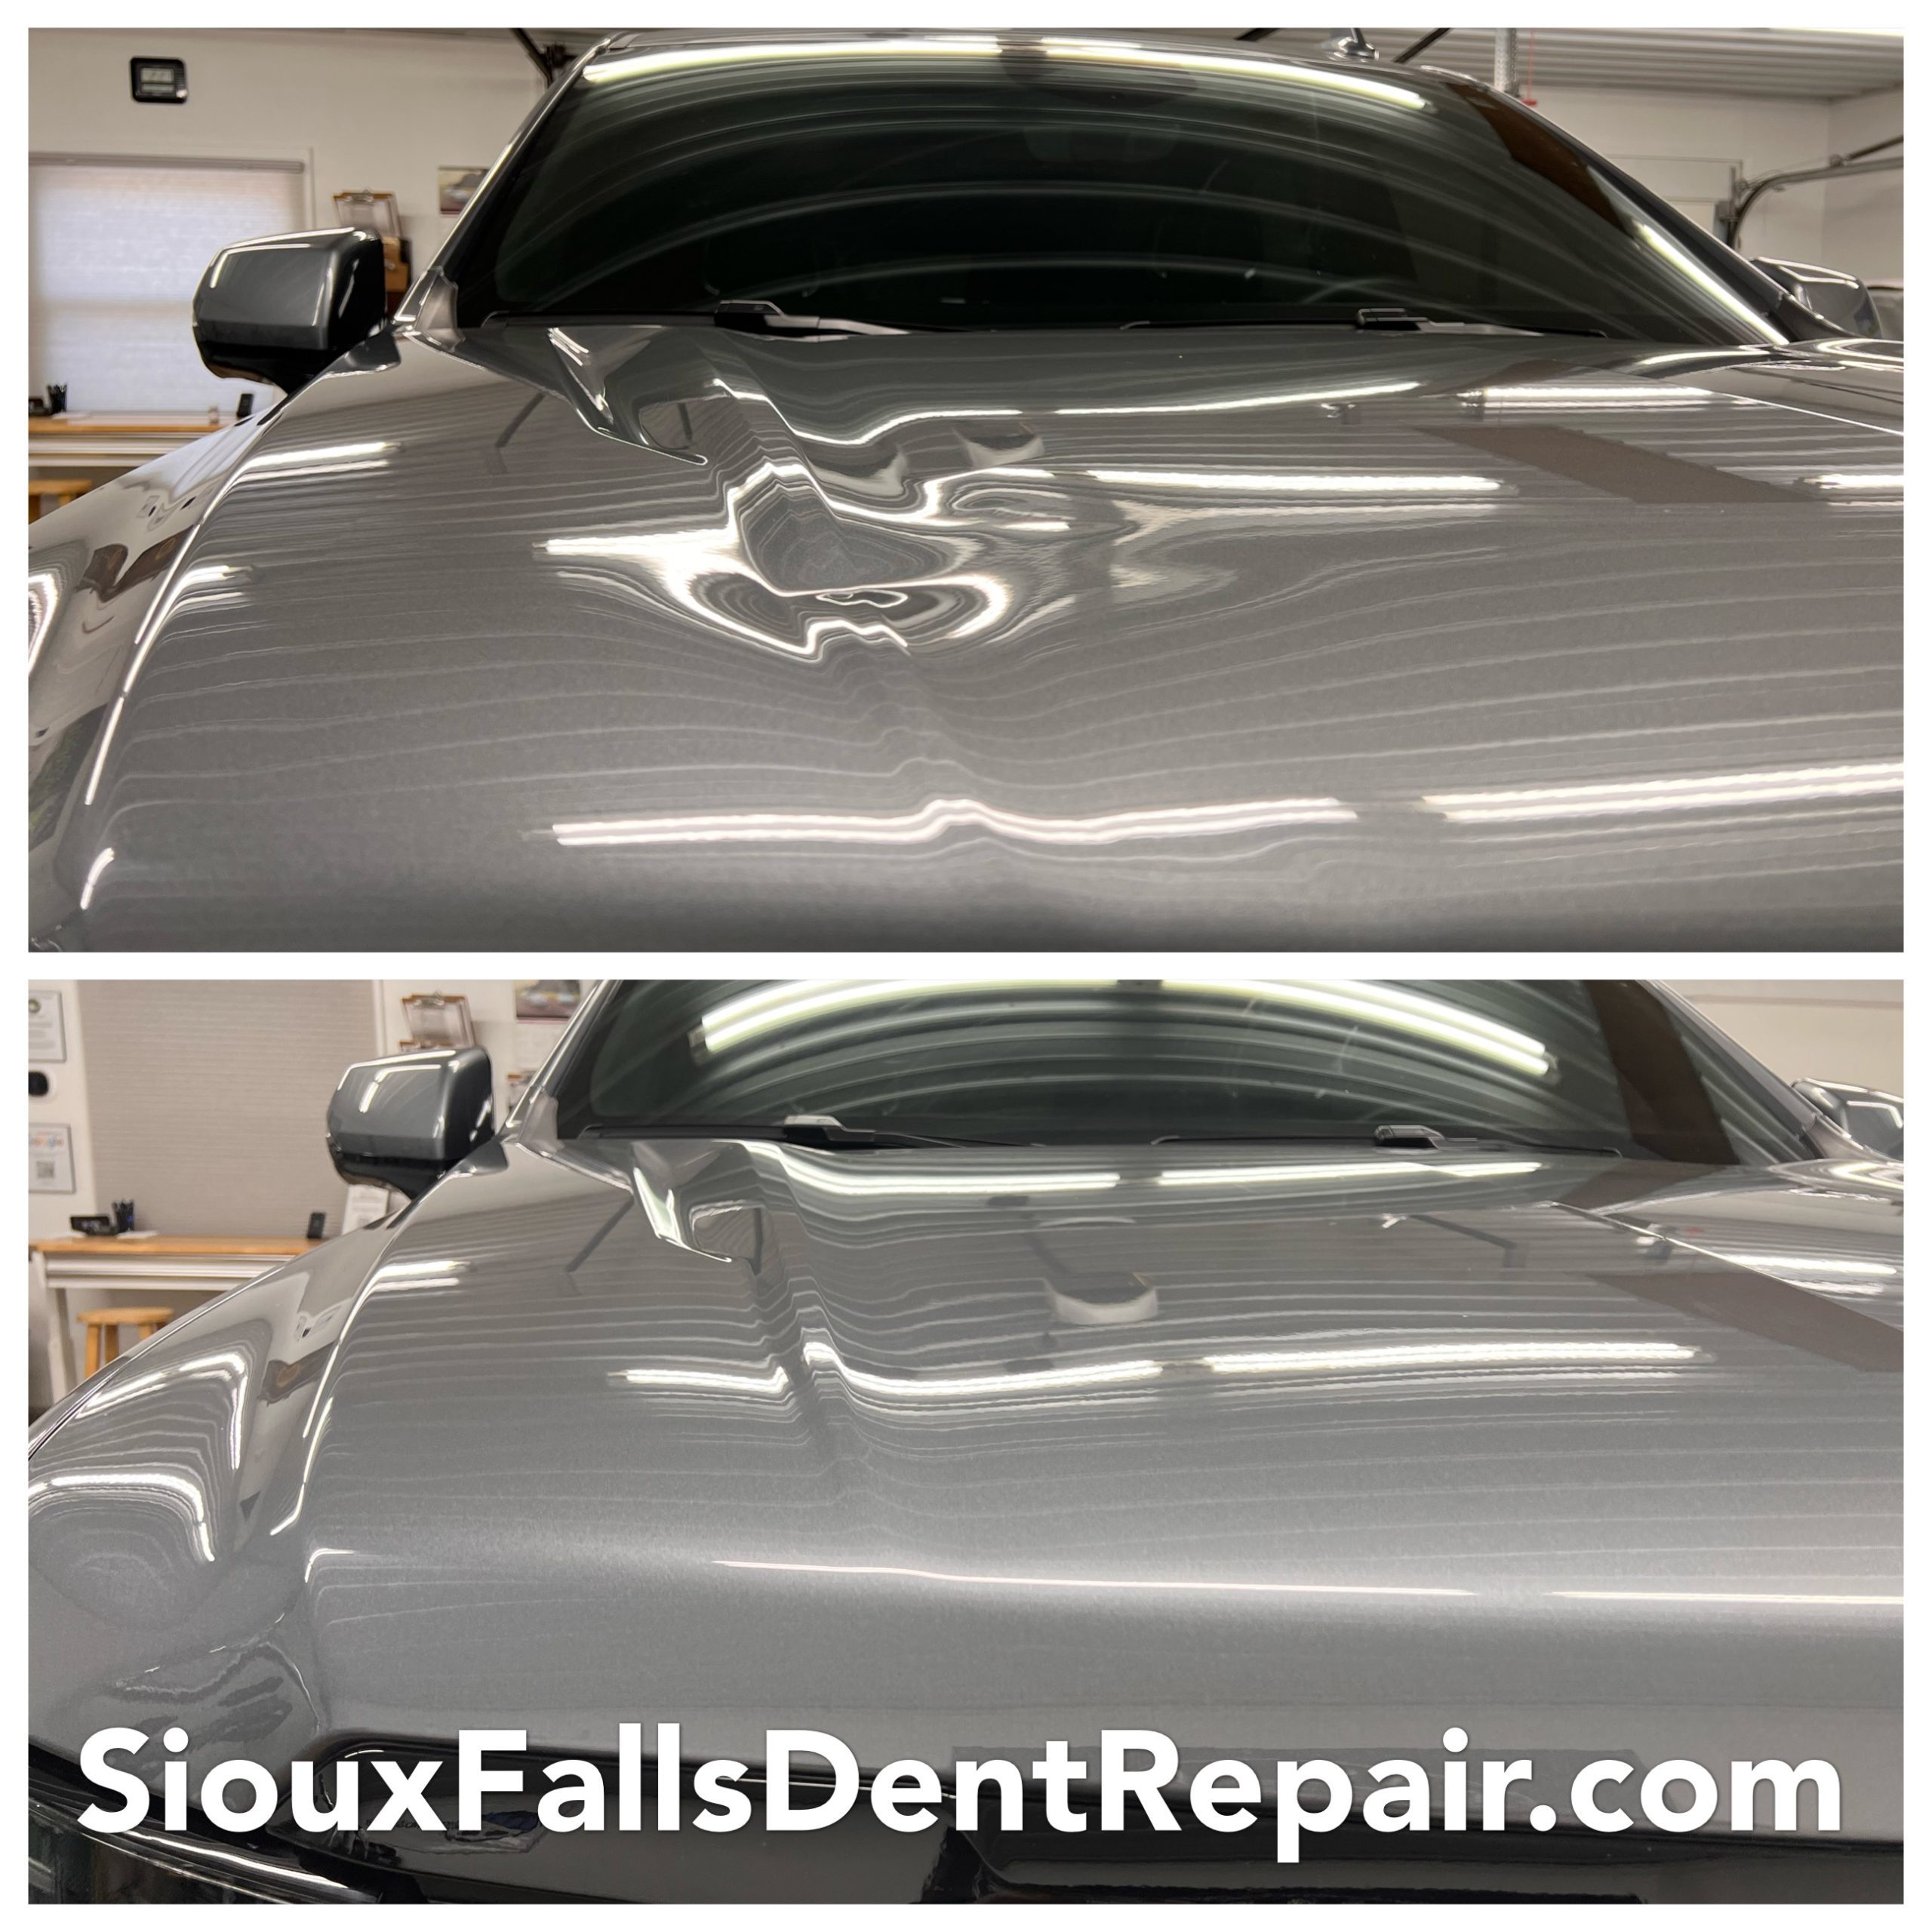 Cadillac Hood Dent Removal - Paintless Dent Repair in Sioux Falls SD